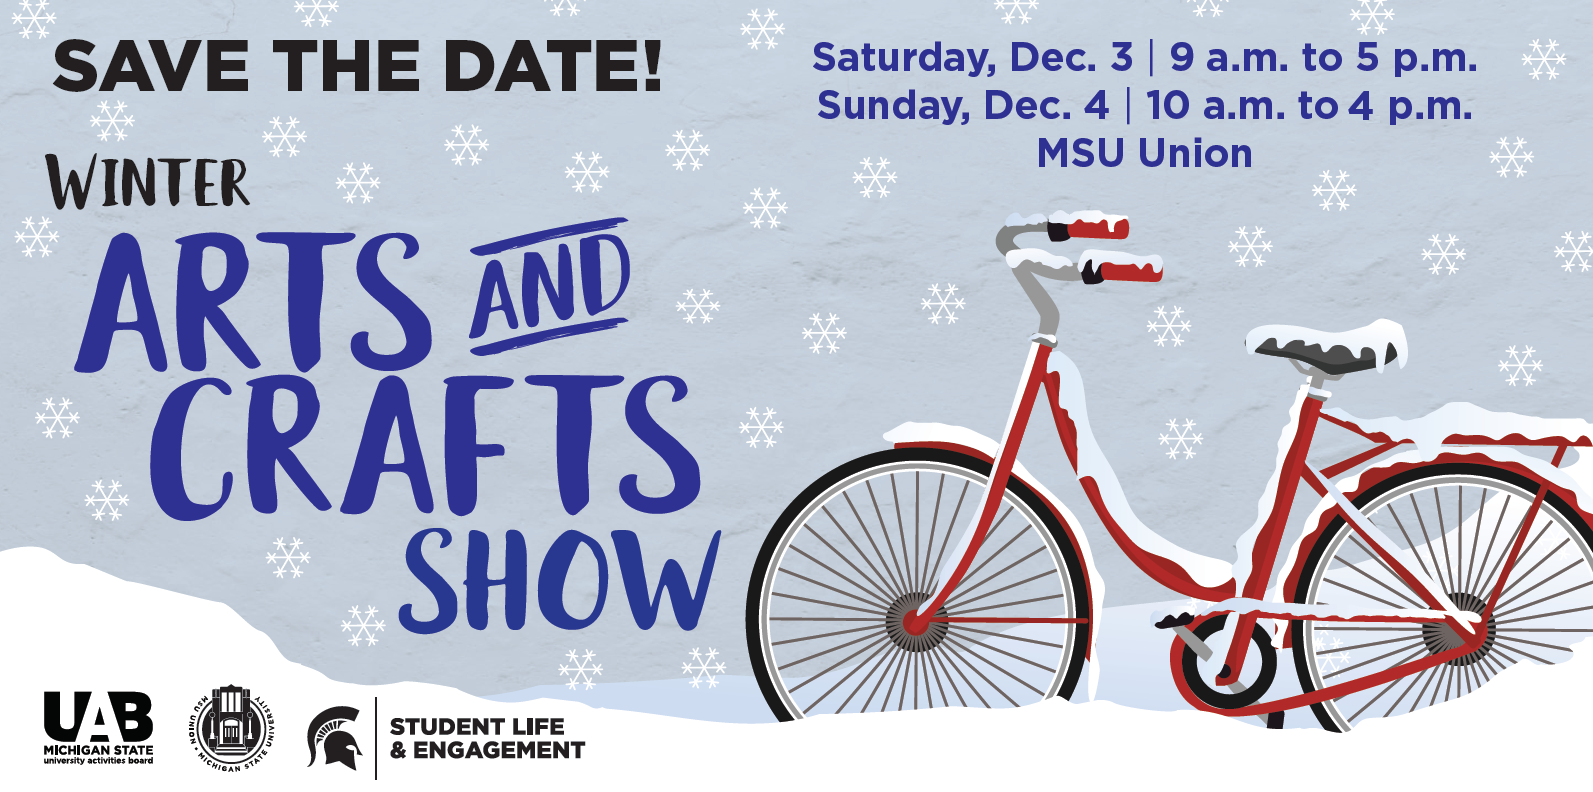 Save the Date! Winter Arts and Craft Show will be Saturday December 3rd from 9AM to 5PM and Sunday December 4th 10AM to 4PM. (Snowy graphic with vintage red bicycle covered in snow)